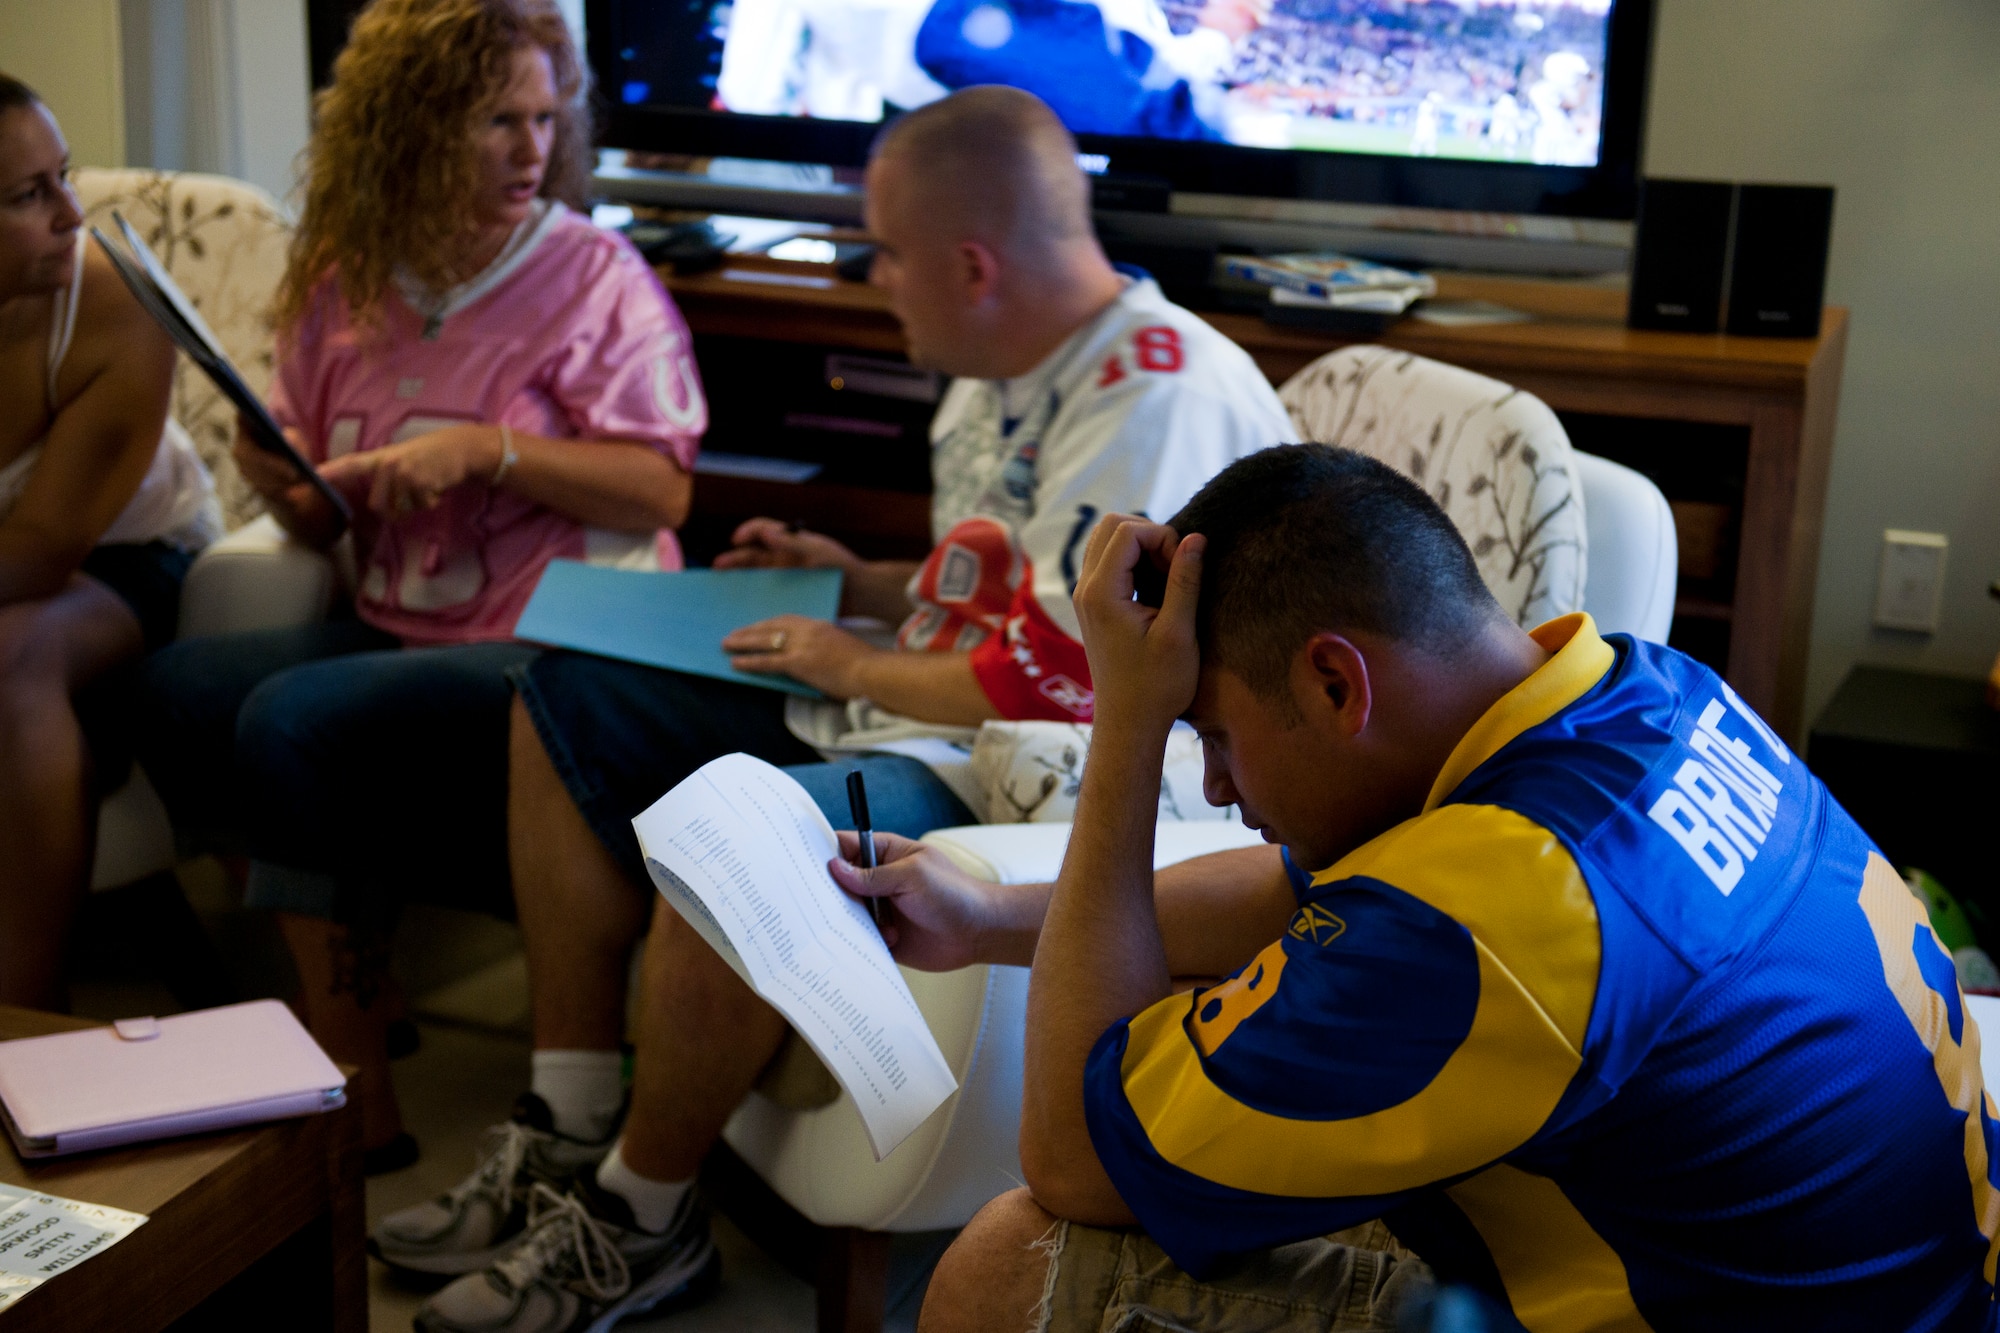 Participants review statistics while selecting players during a fantasy football draft Sept. 2, 2011, at Incirlik Air Base, Turkey. Fantasy drafts can be online, but a group of Incirlik Airmen, spouses and contractors decided to participate in a live draft. This type offers participants an opportunity to socialize and build camaraderie. (U.S. Air Force photo by Tech. Sgt. Michael B. Keller/Released)